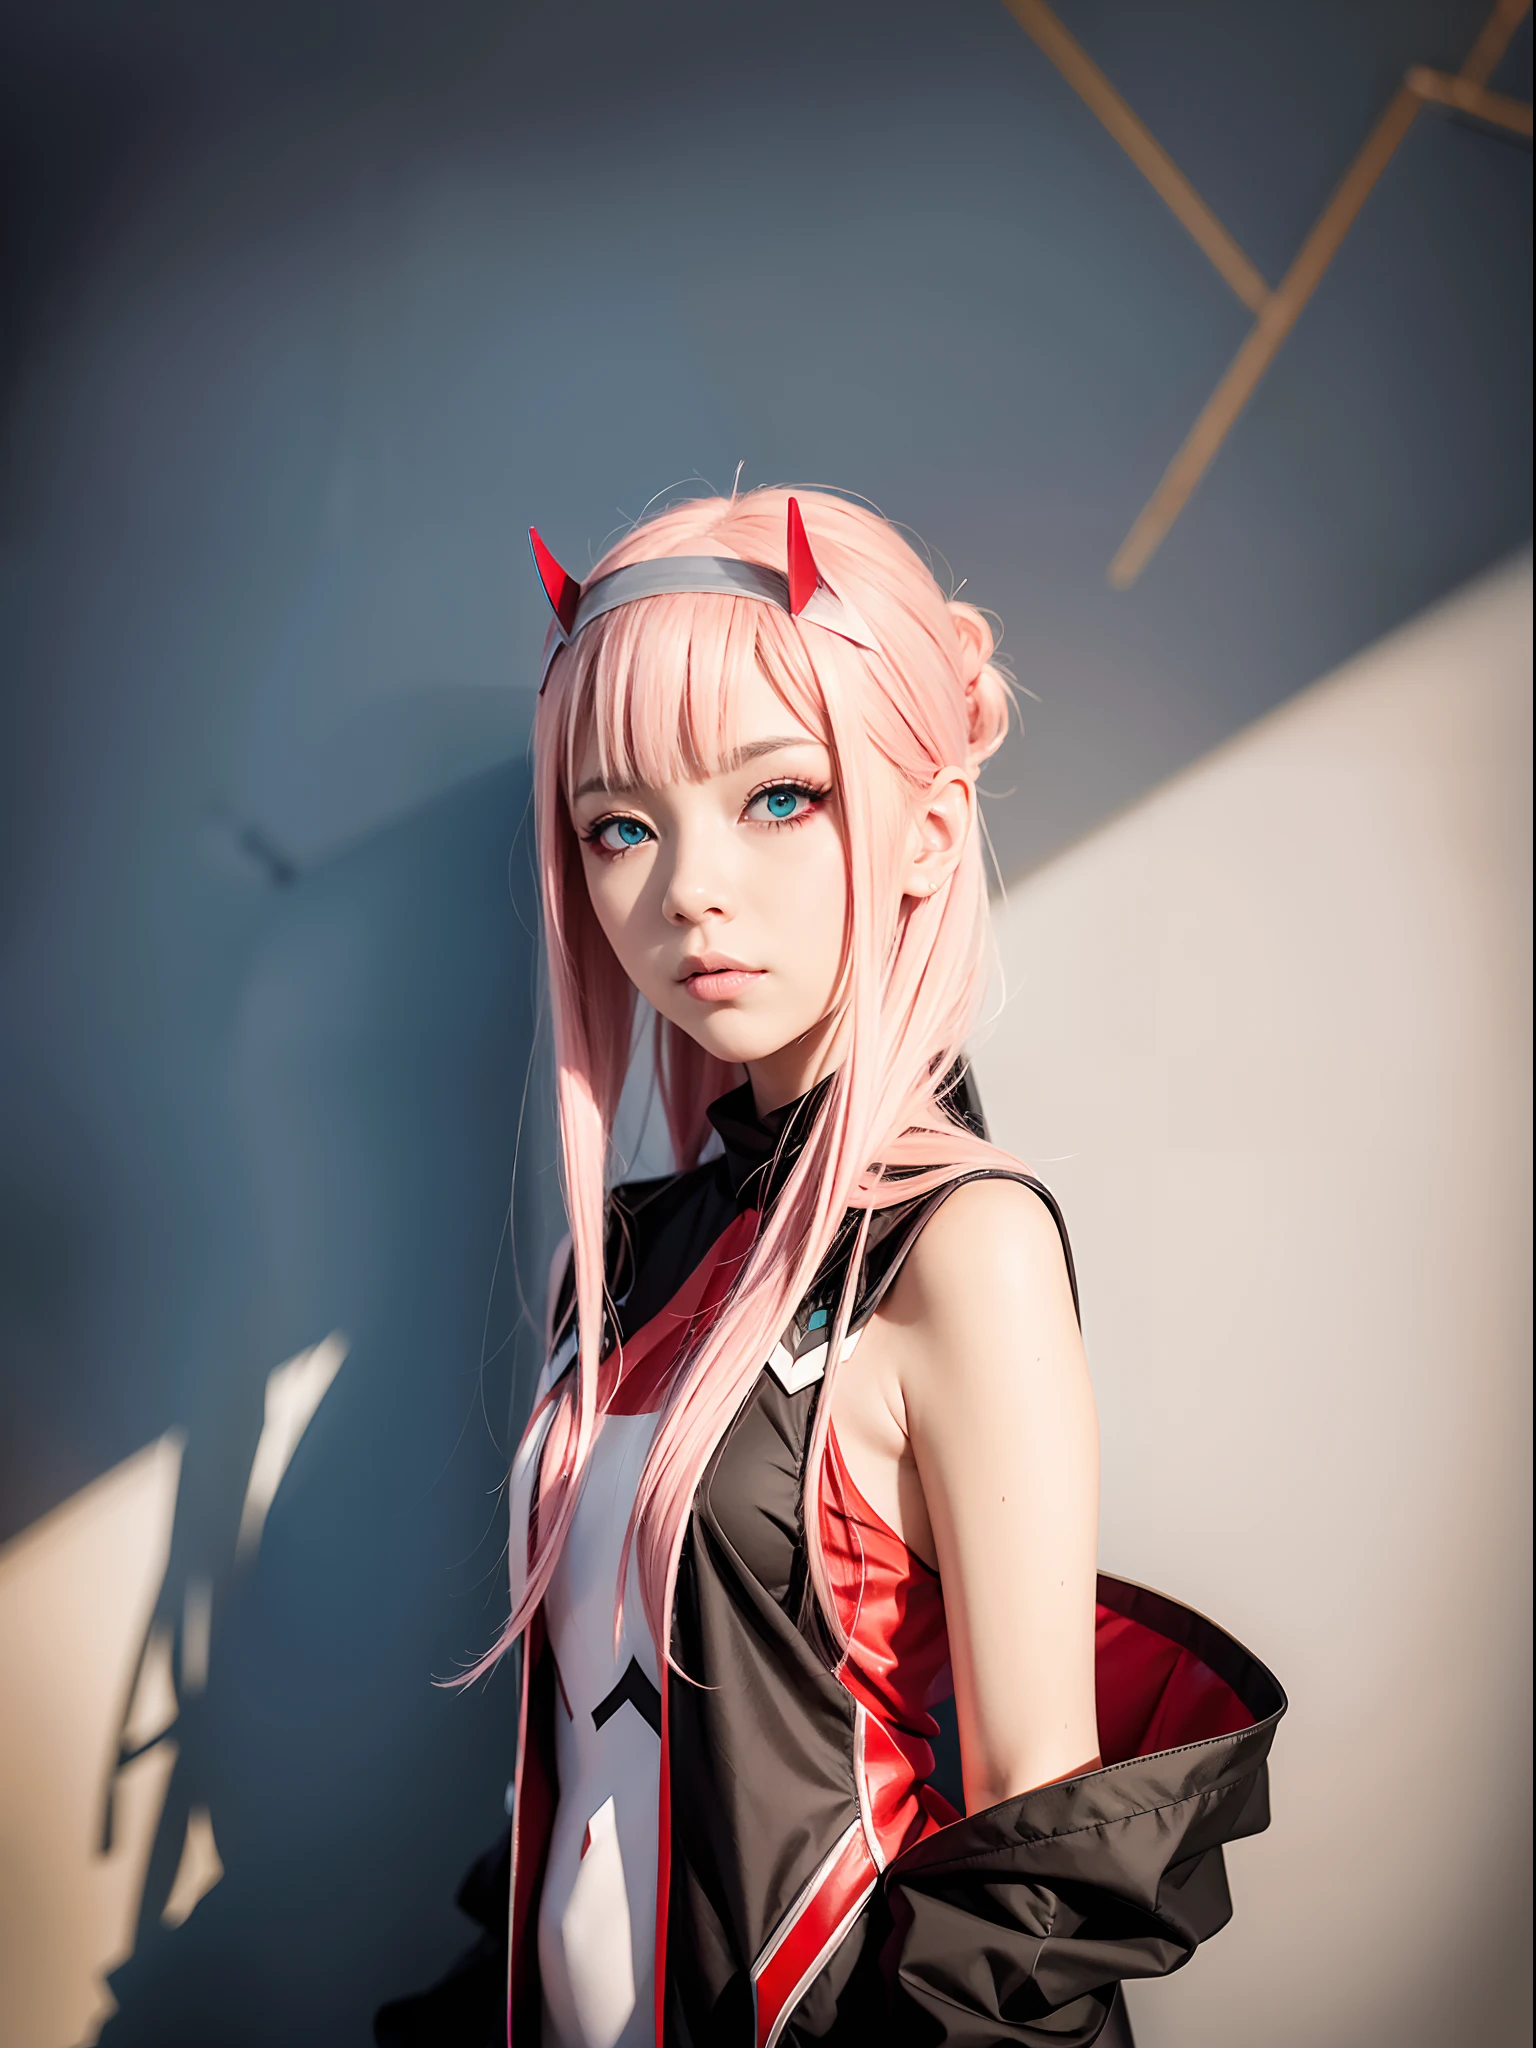 A girl, cosplaying Zero Two from anime Darling in the FranXX, expressive eyes, beautiful face, makeup, perfect face, background gray wall.